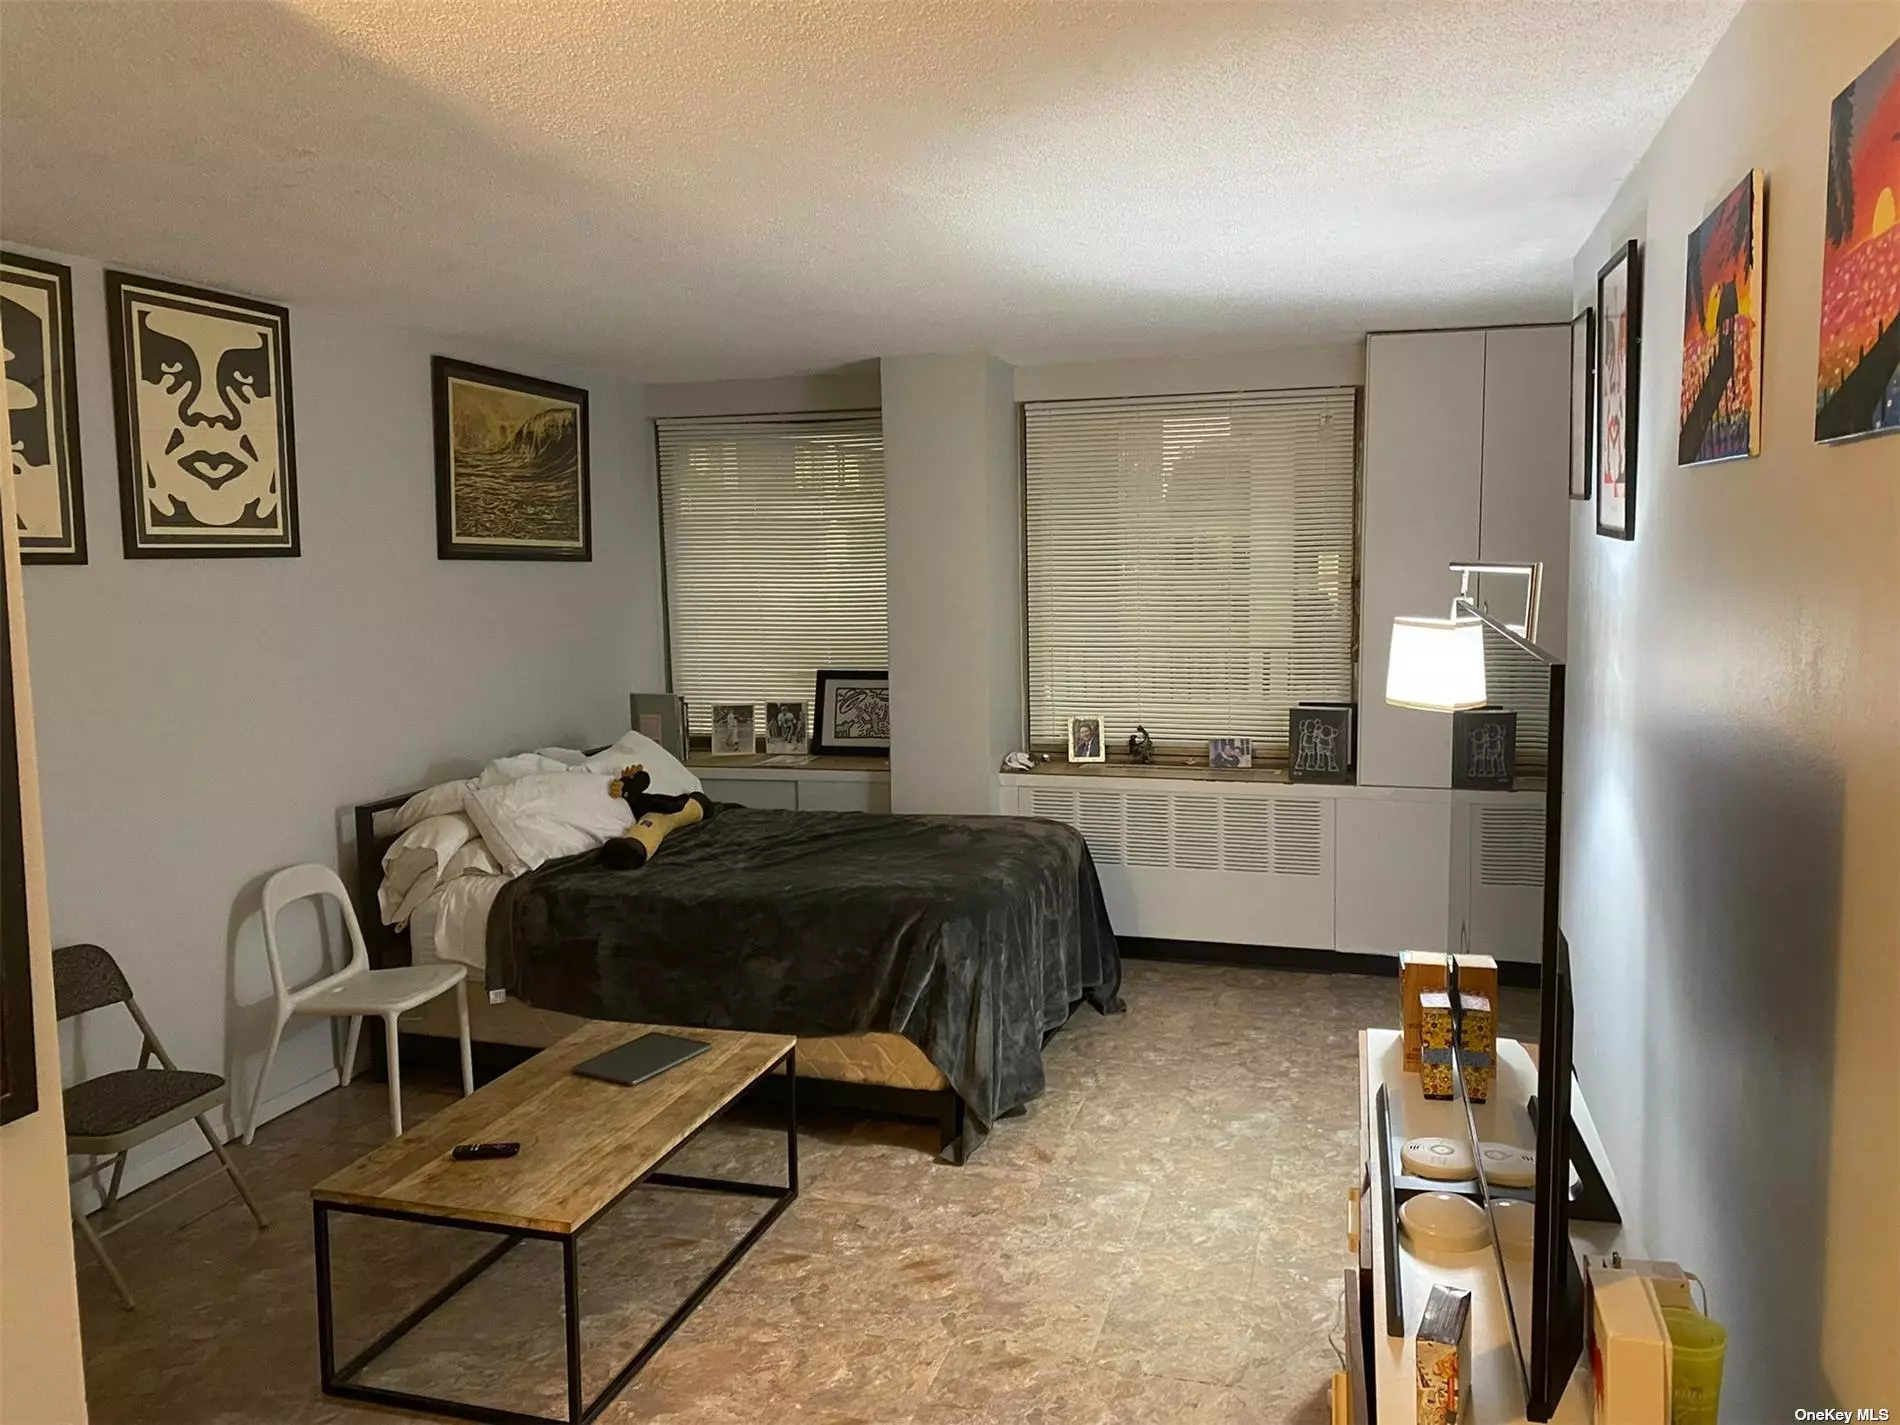 large bright studio condo. located at center Financial district ..hardwood floor with granites kitchen countertop. center air-condition .24hr/7days security doorman.. live-in super. walk distance to bus stop m15 and wall street 2, 3, 4.5.subway station , chinatown & south street seaport , stated island . ferry port.3 elevators. must see!!